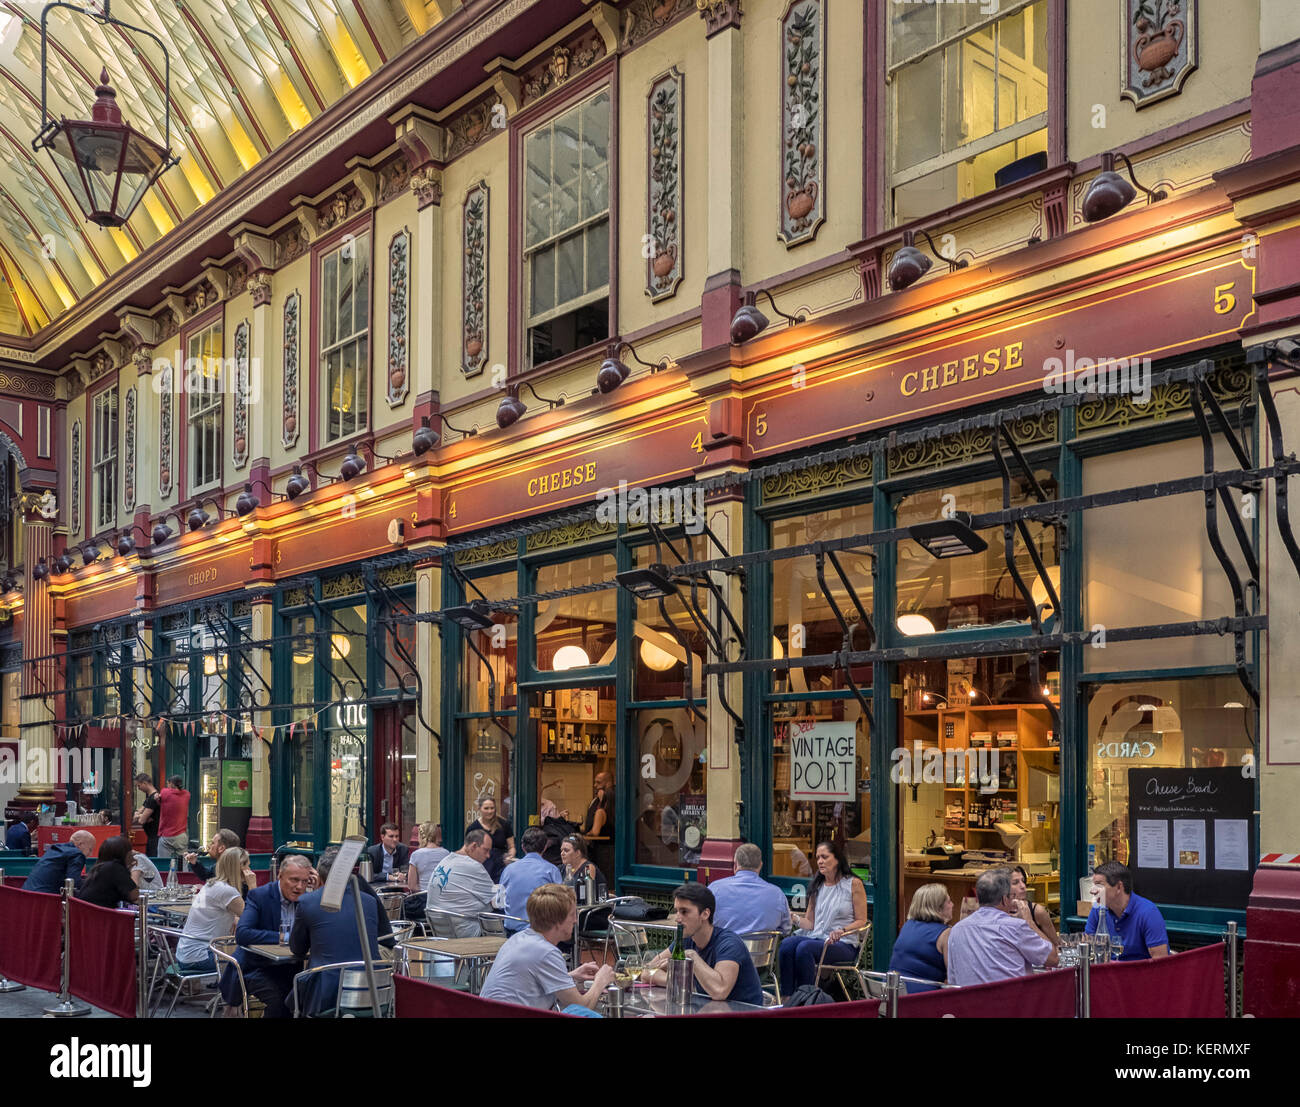 LEADENHALL MARKET, LONDON: people at the Bars and Restaurants inside